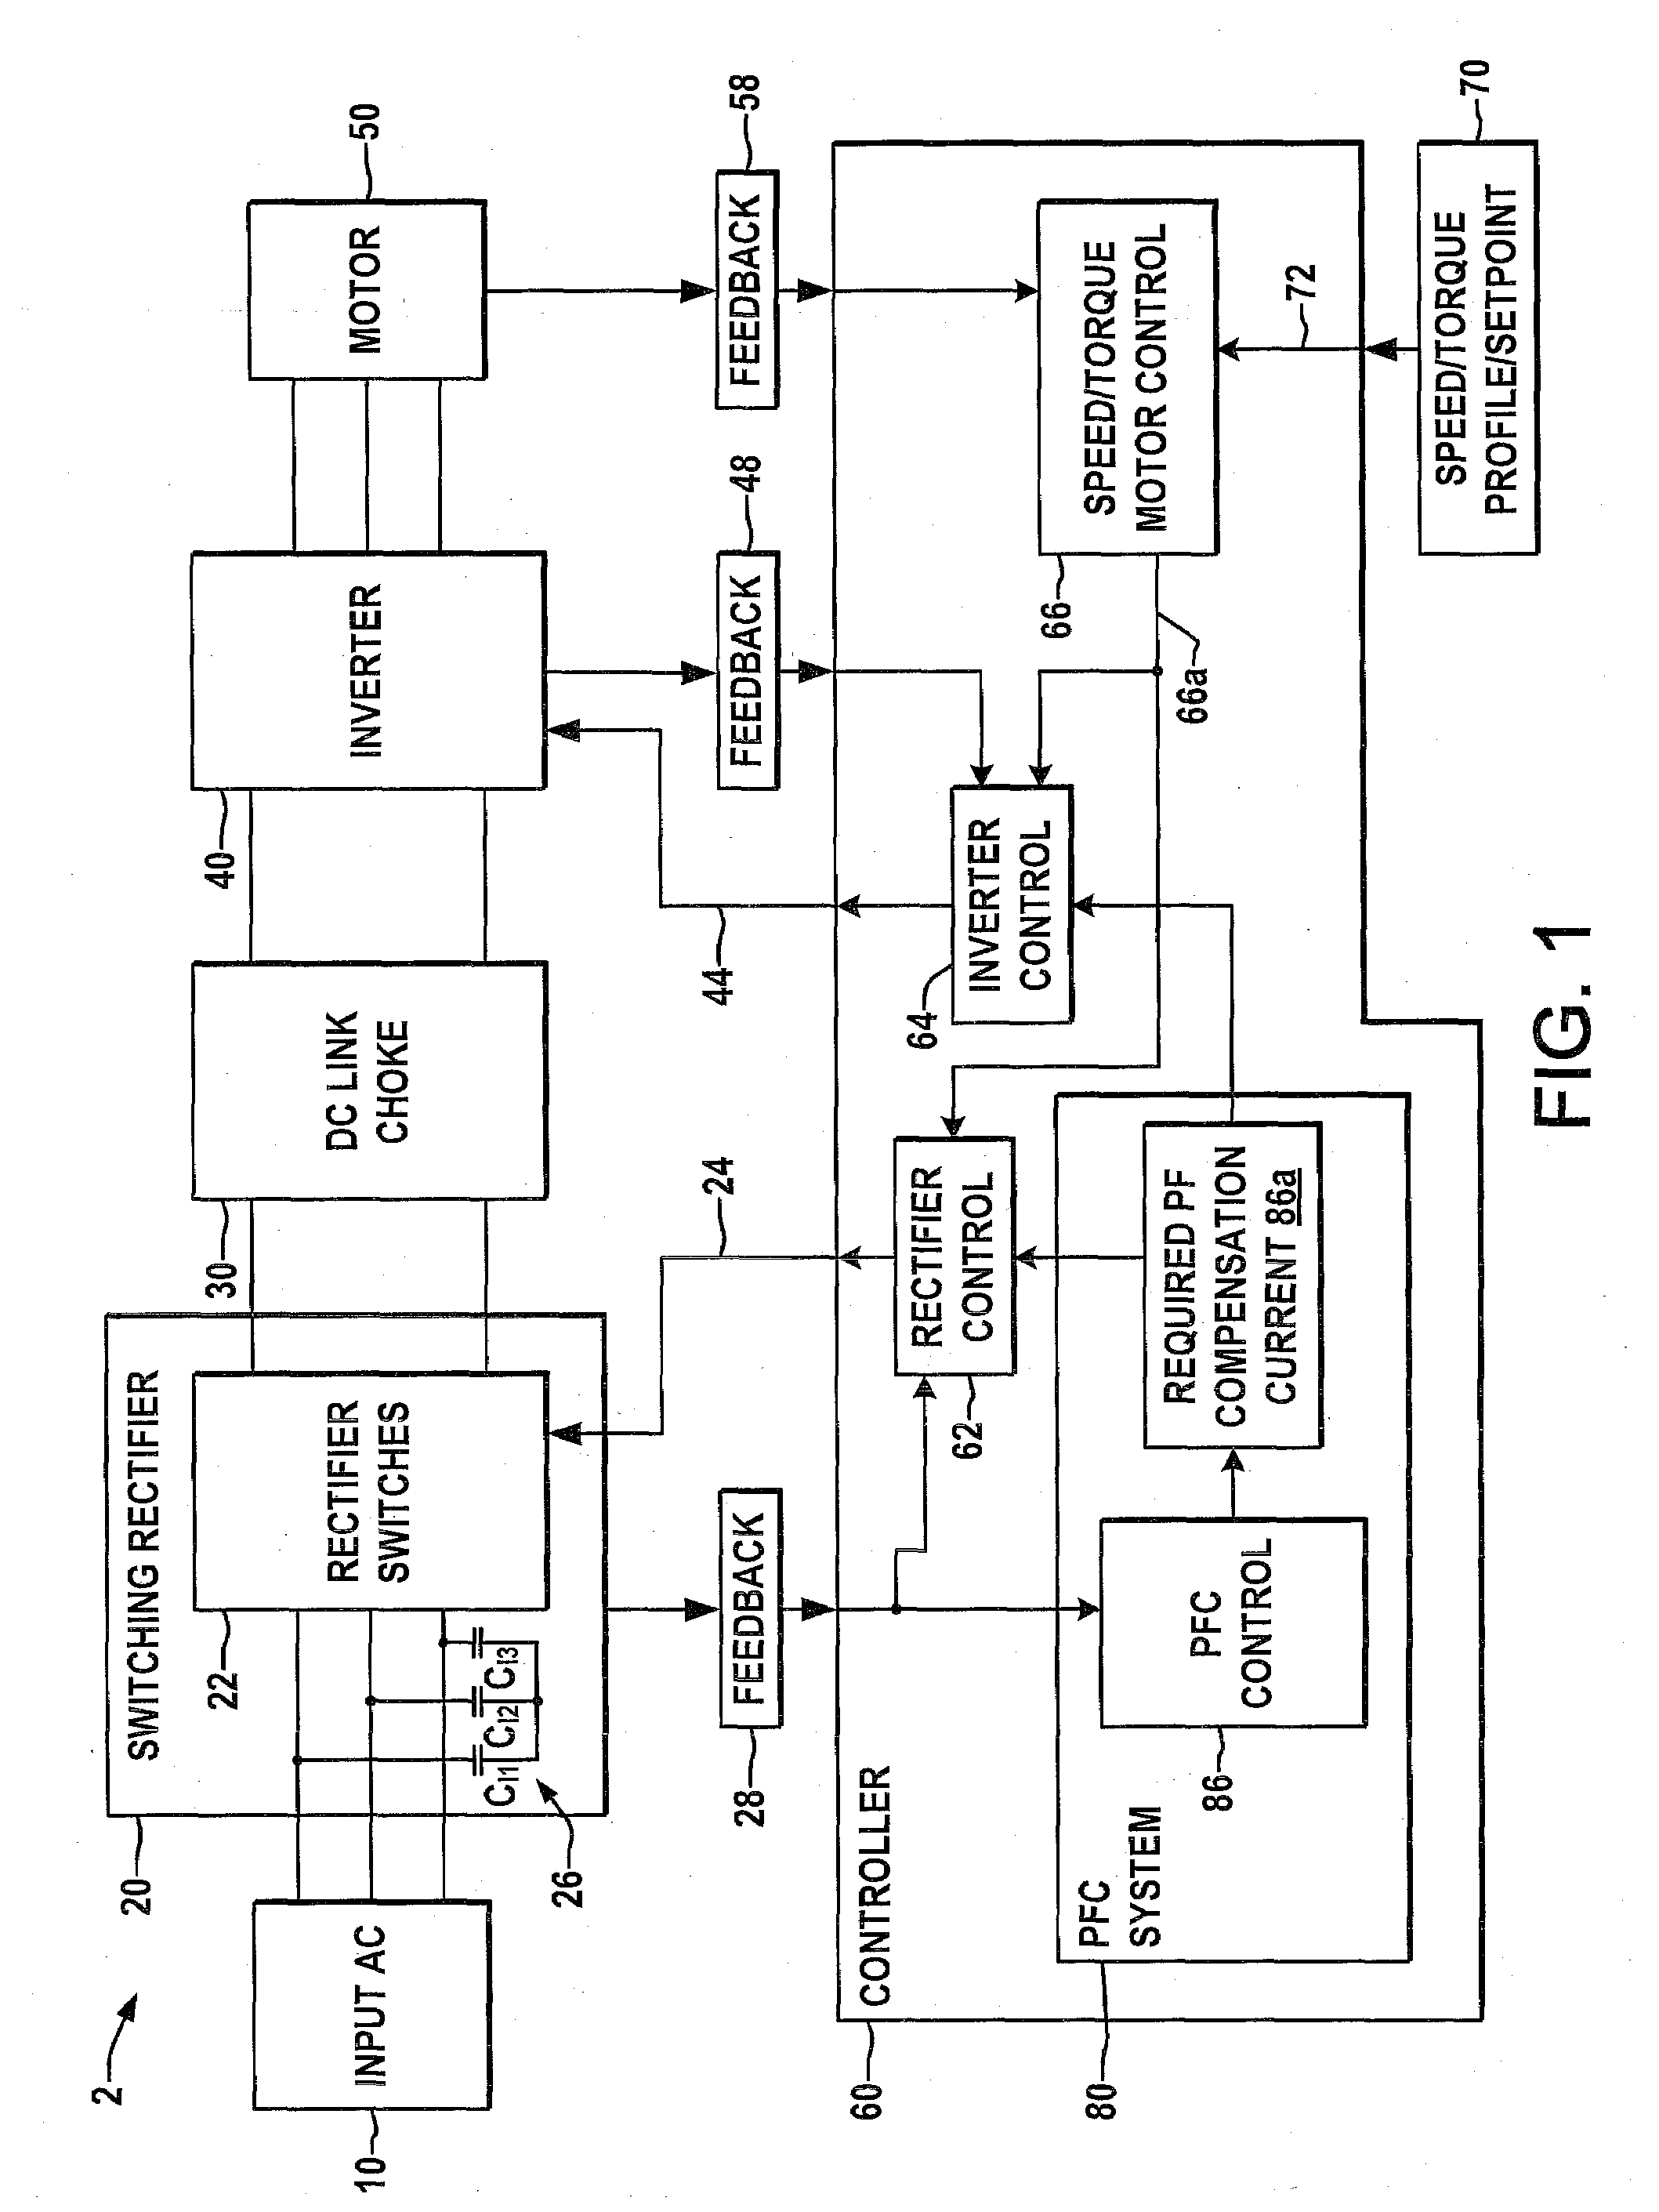 Systems and methods for improved motor drive power factor control